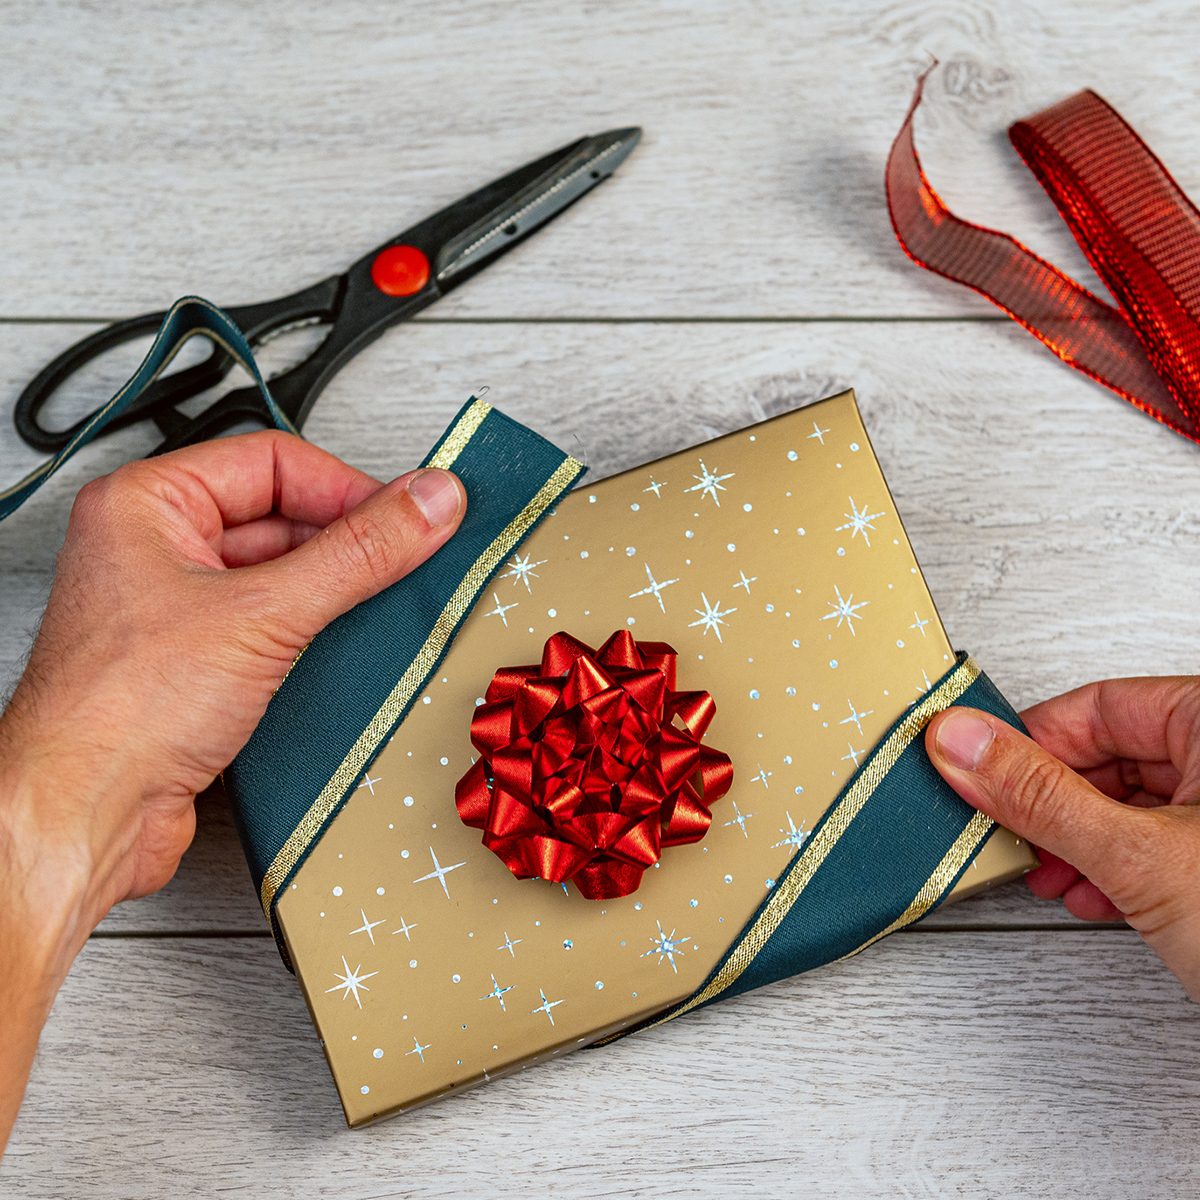 Gift Wrapping Process With Box Scissors And Thread From Above Flat